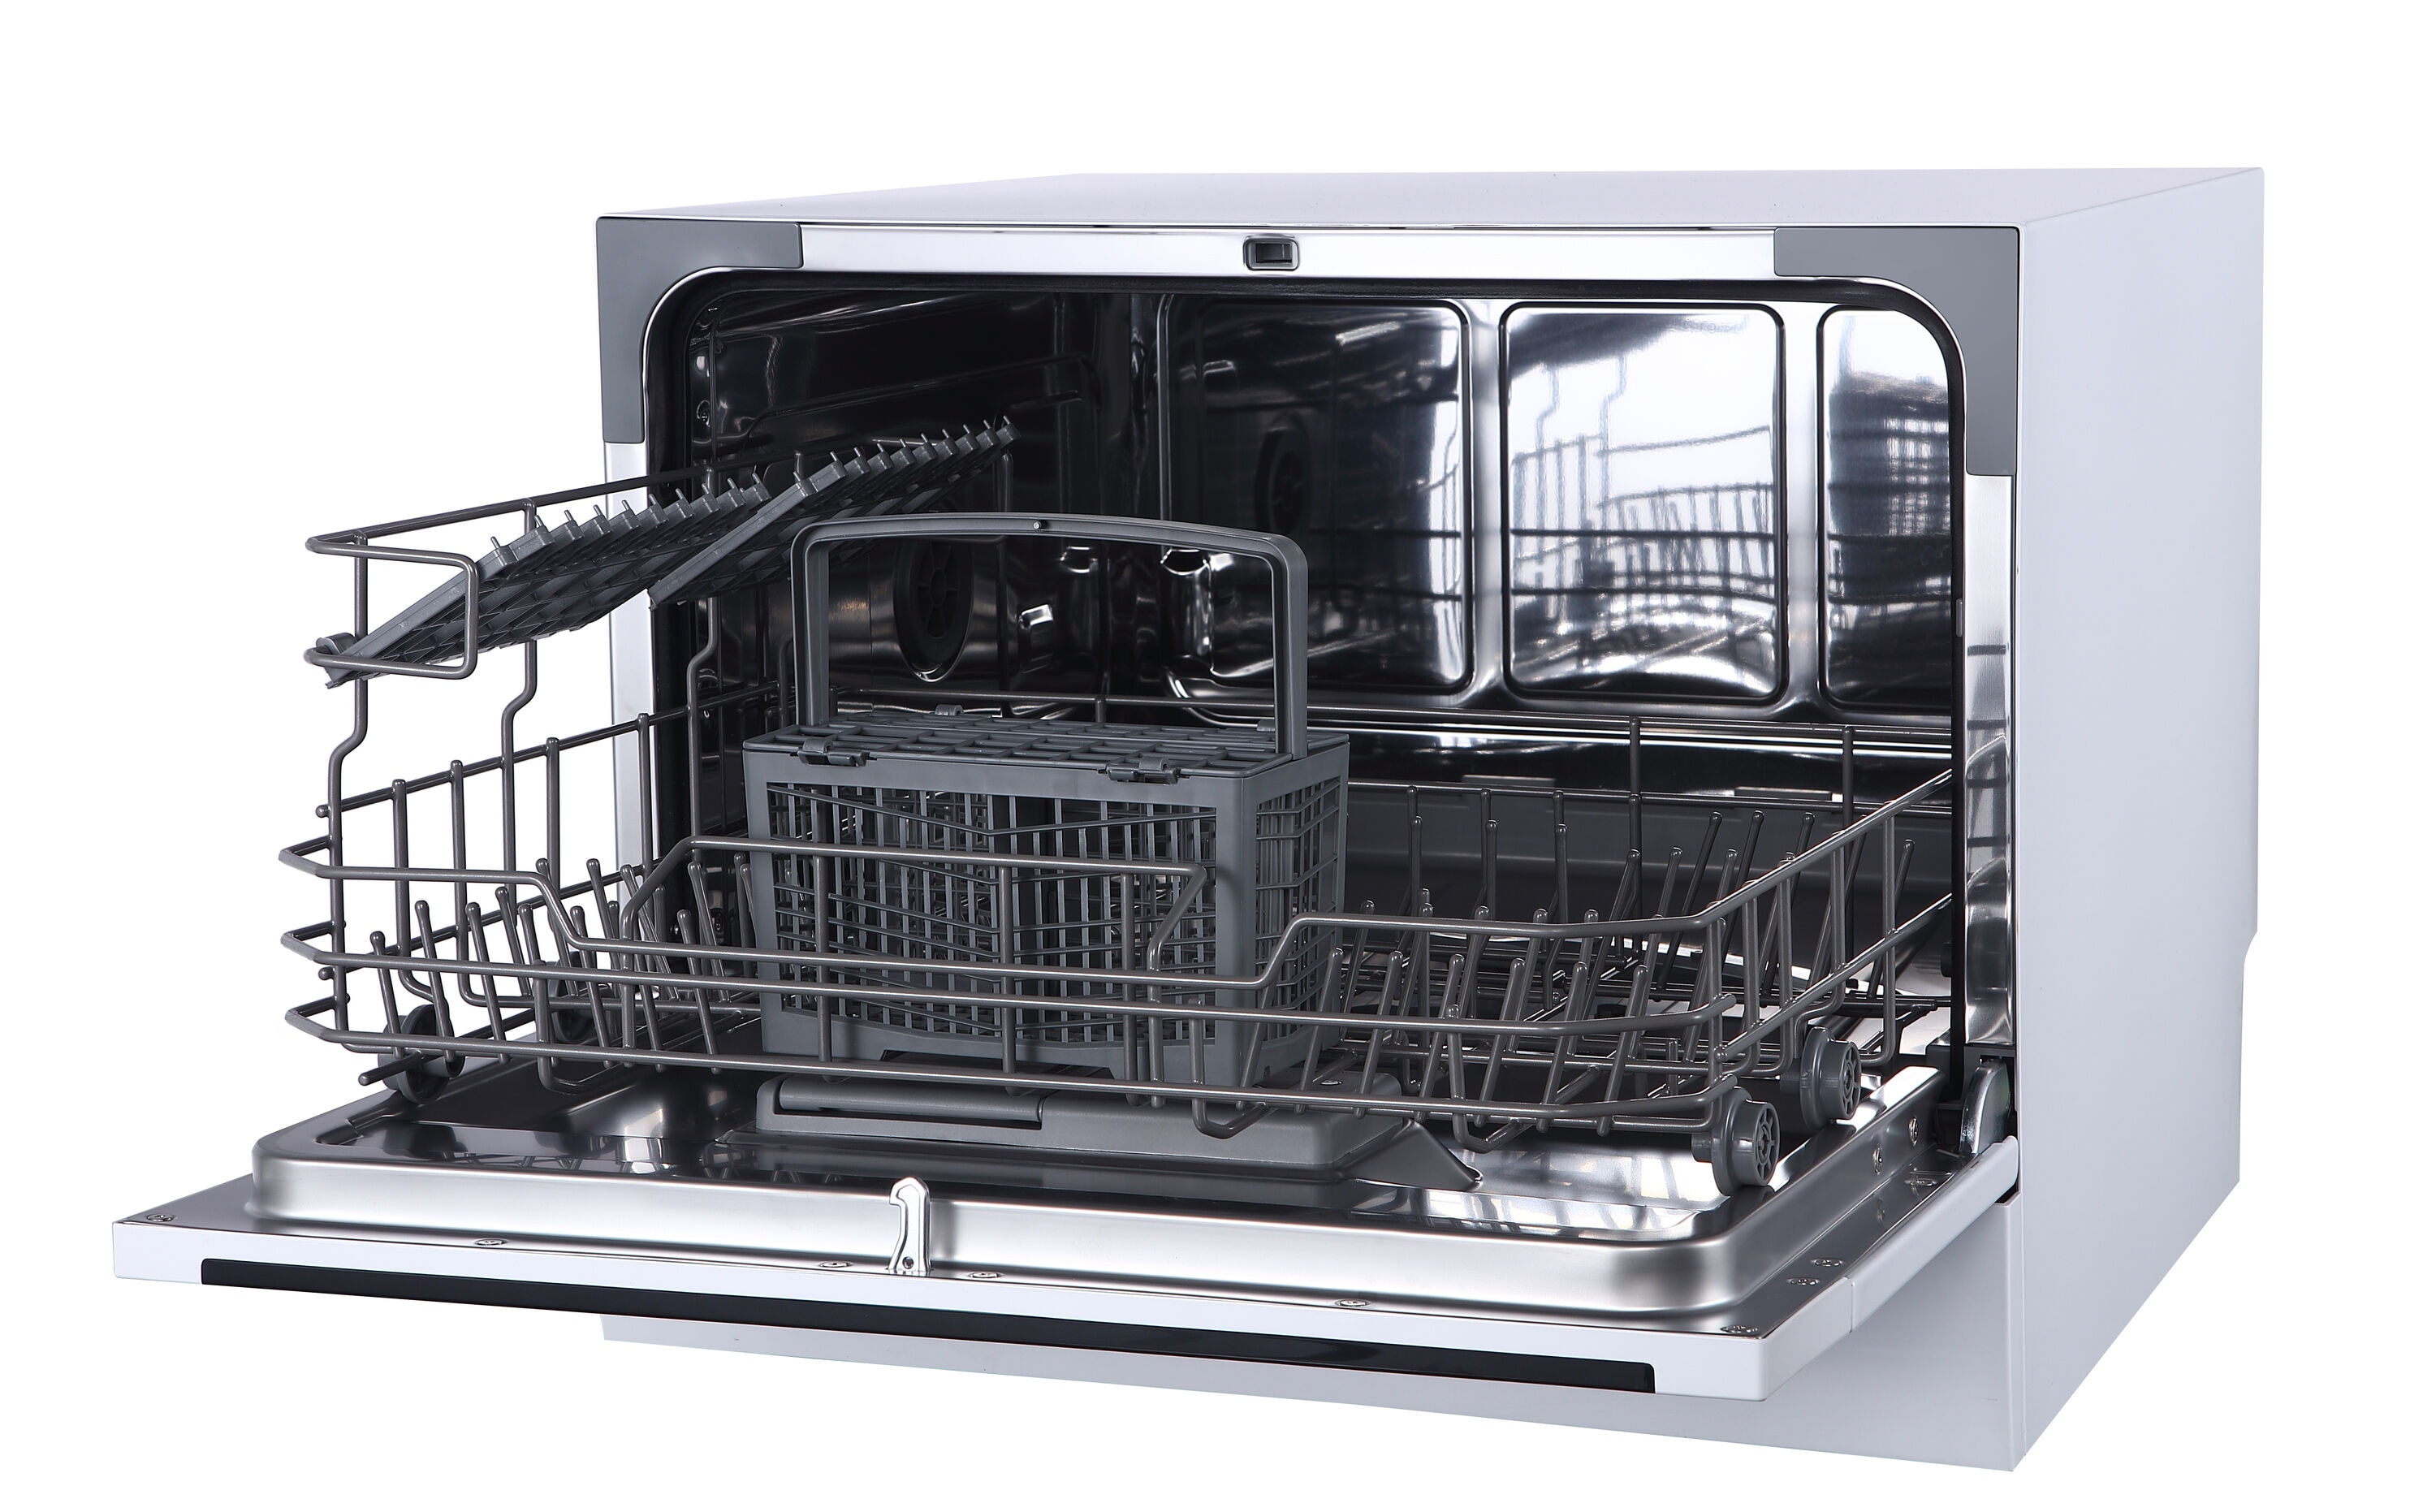 Small professional countertop dishwasher by Farberware - Appliances -  Federal Heights, Colorado